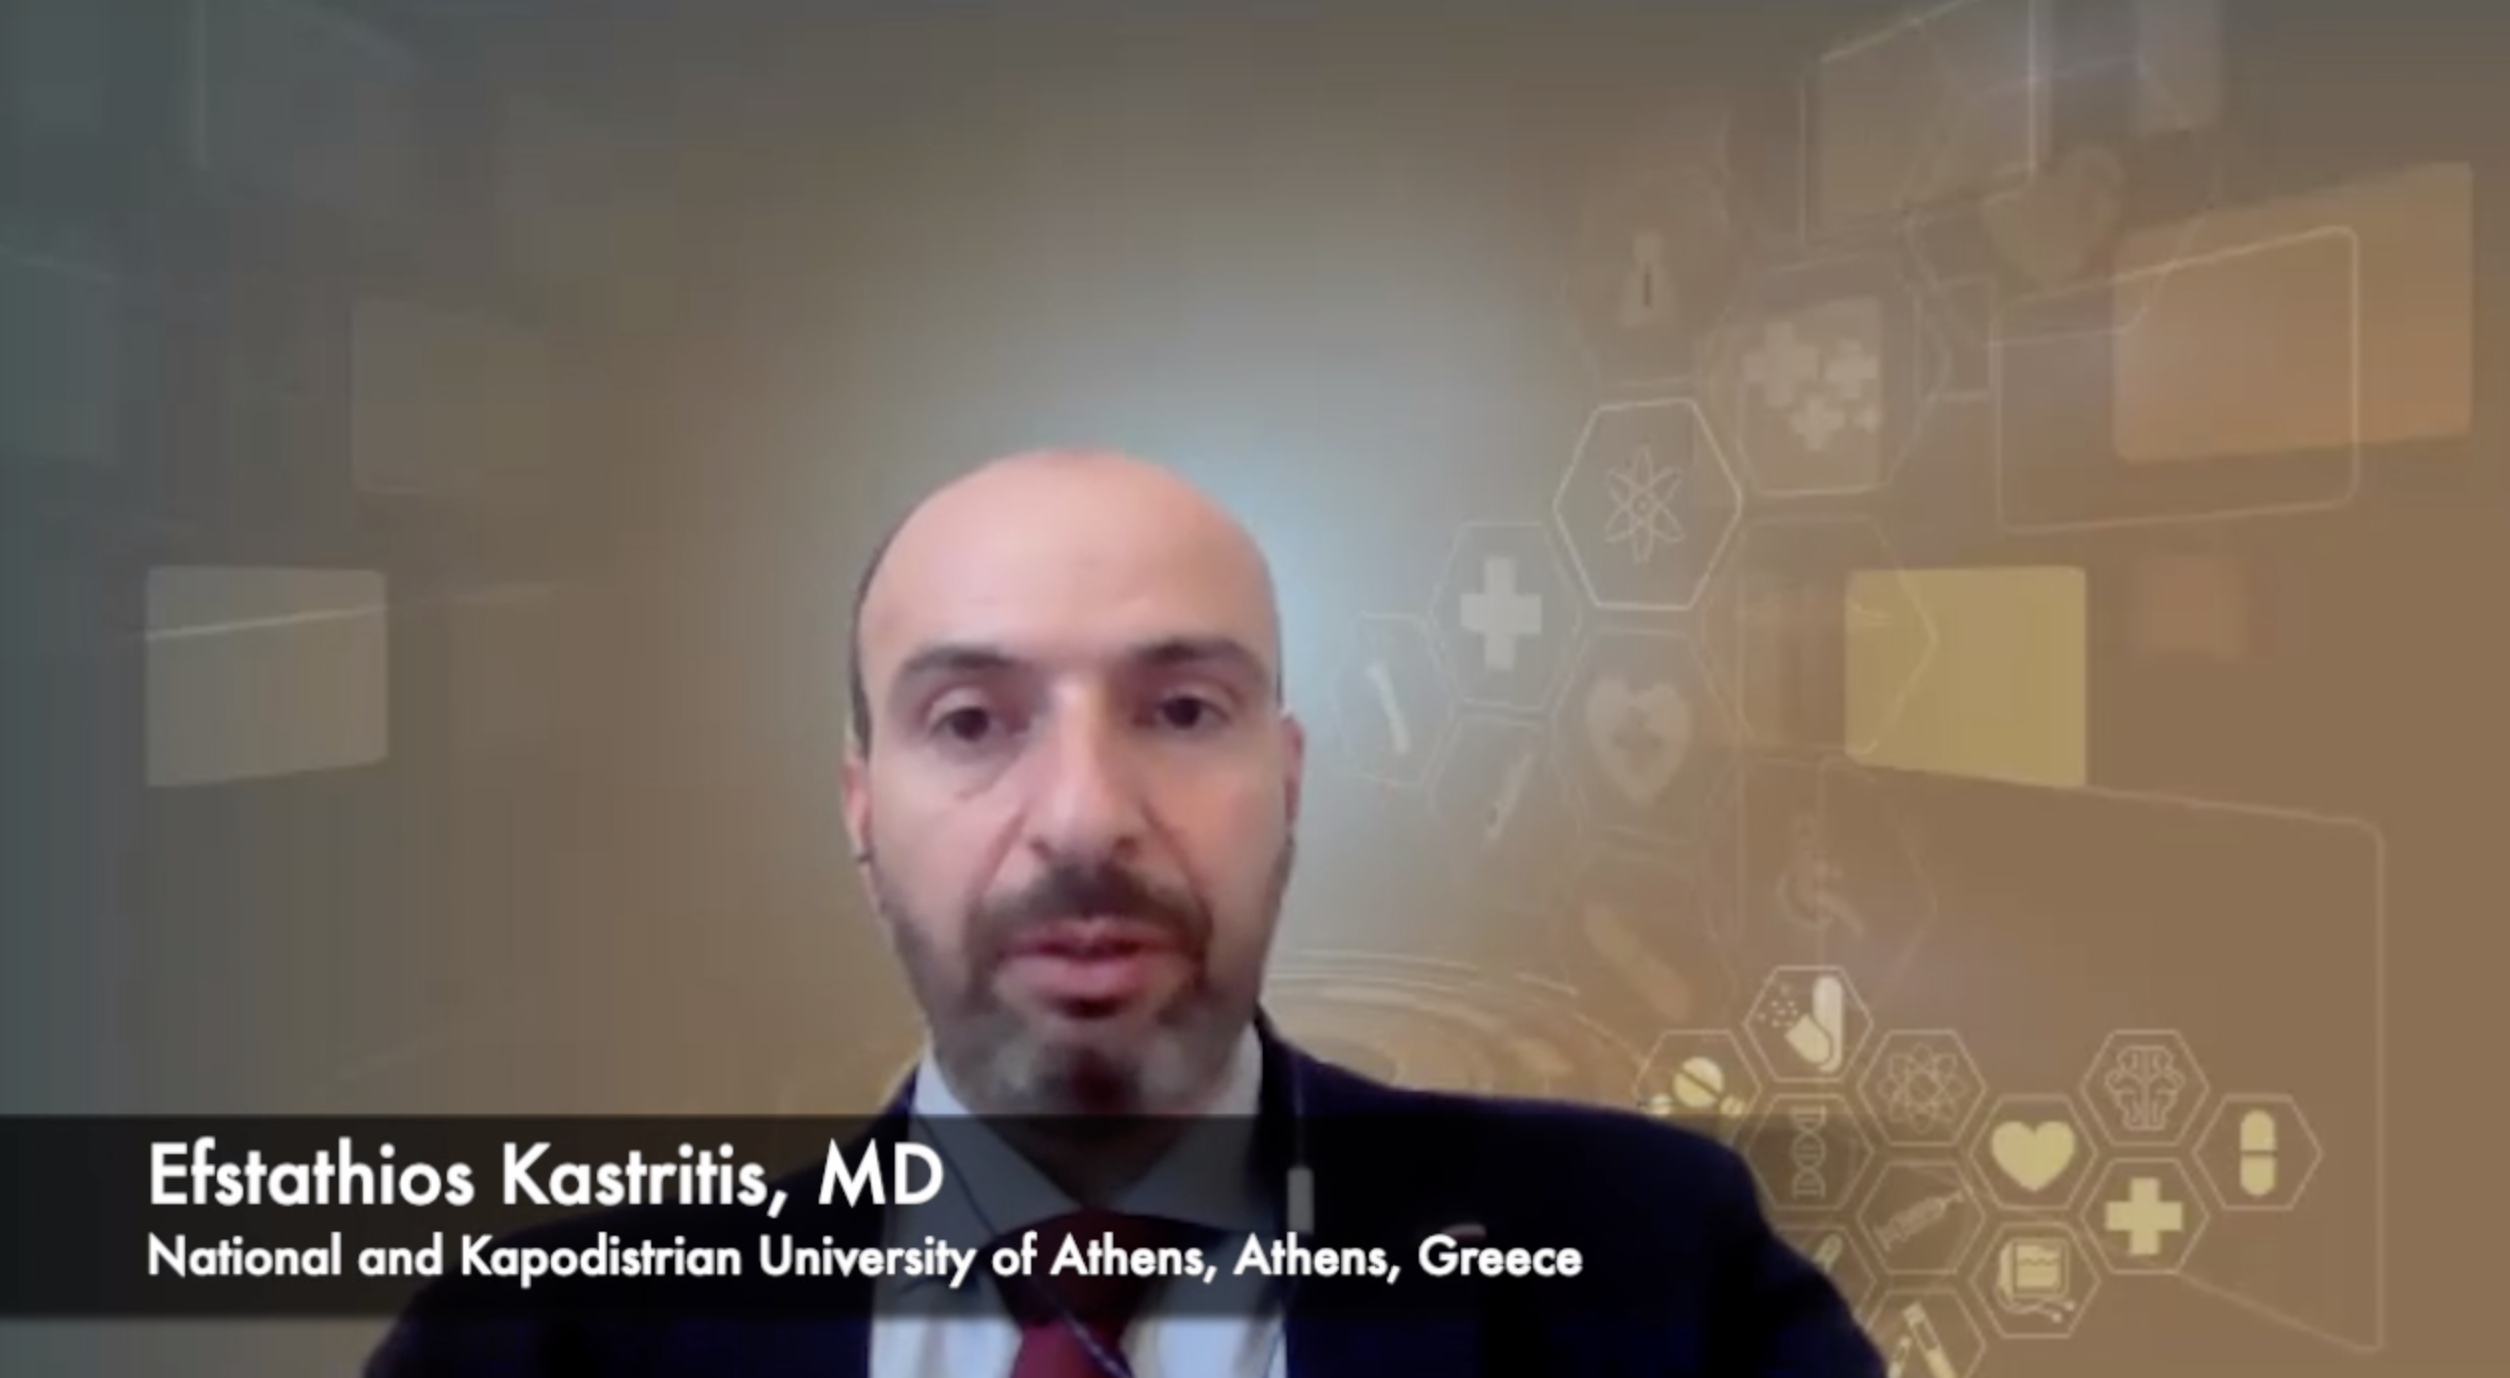 Efstathios Kastritis, MD, on Main Findings From the ANDROMEDA Study in Newly Diagnosed AL Amyloidosis